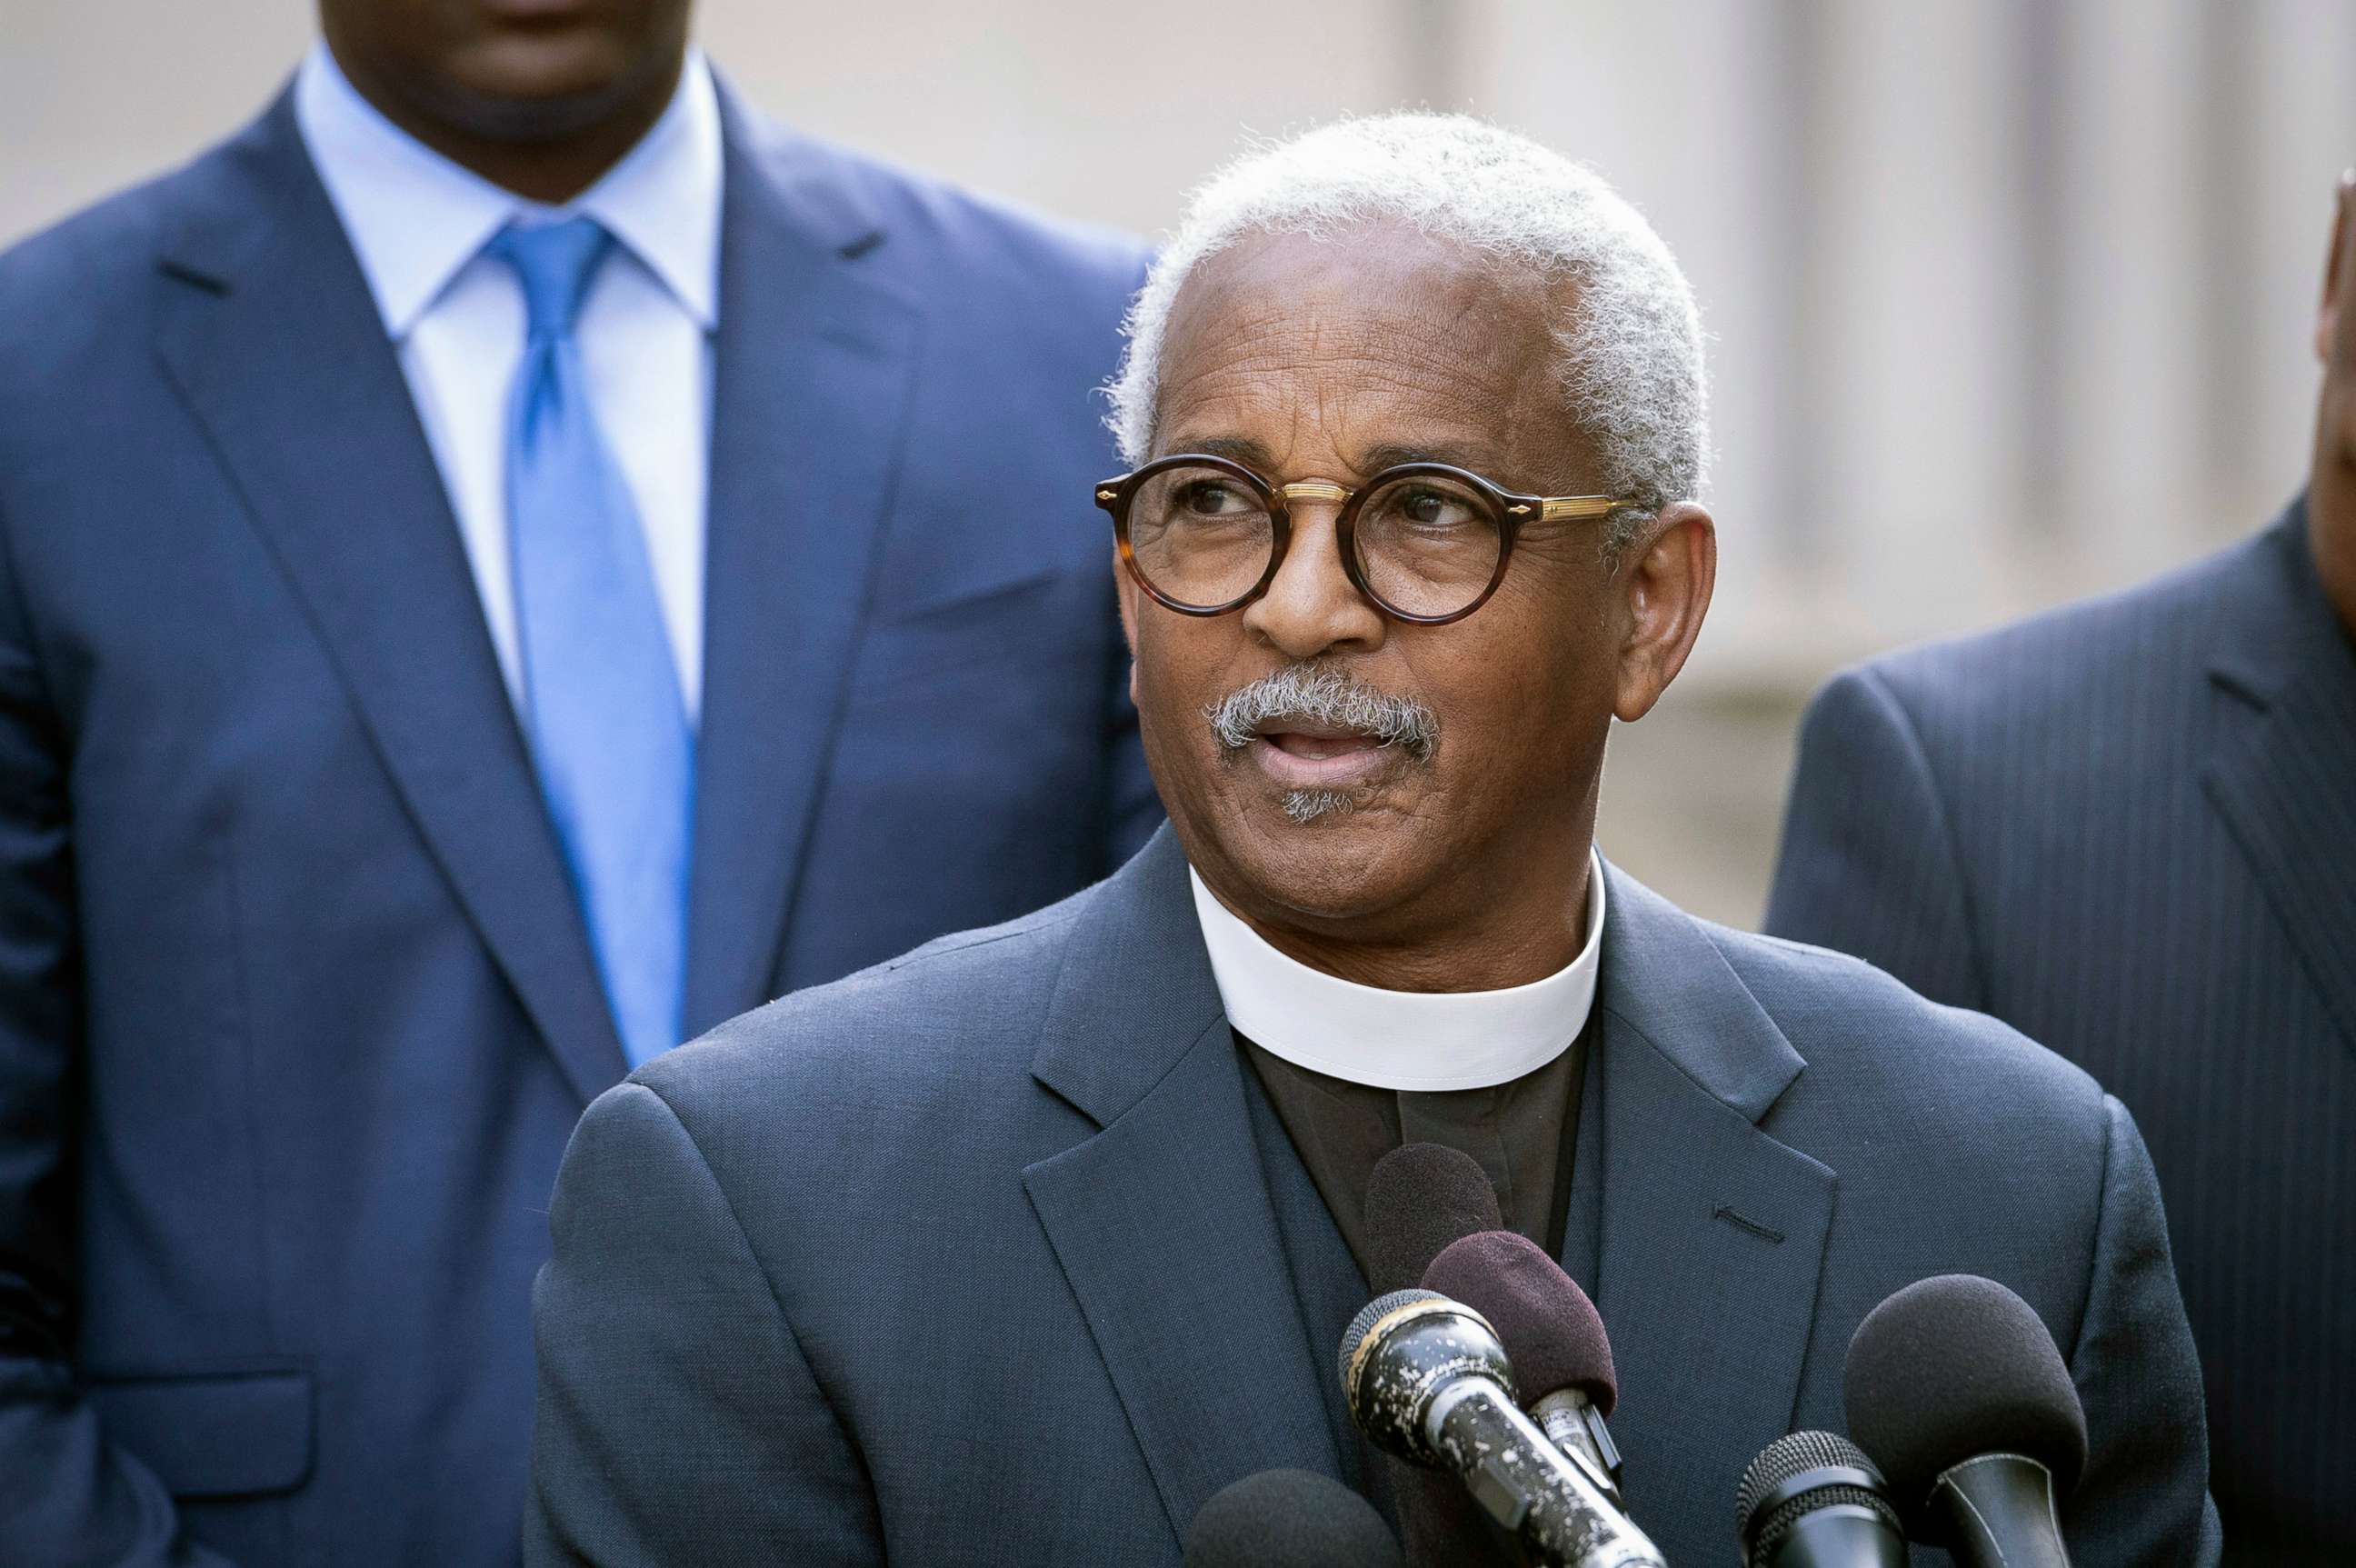 PHOTO: The Rev. Anthony Thompson, his wife Myra was killed while leading Bible study during the 2015 Mother Emanuel AME Church shooting in South Carolina, speaks with reporters outside the Justice Department, in Washington, D.C., on Oct. 28, 2021.